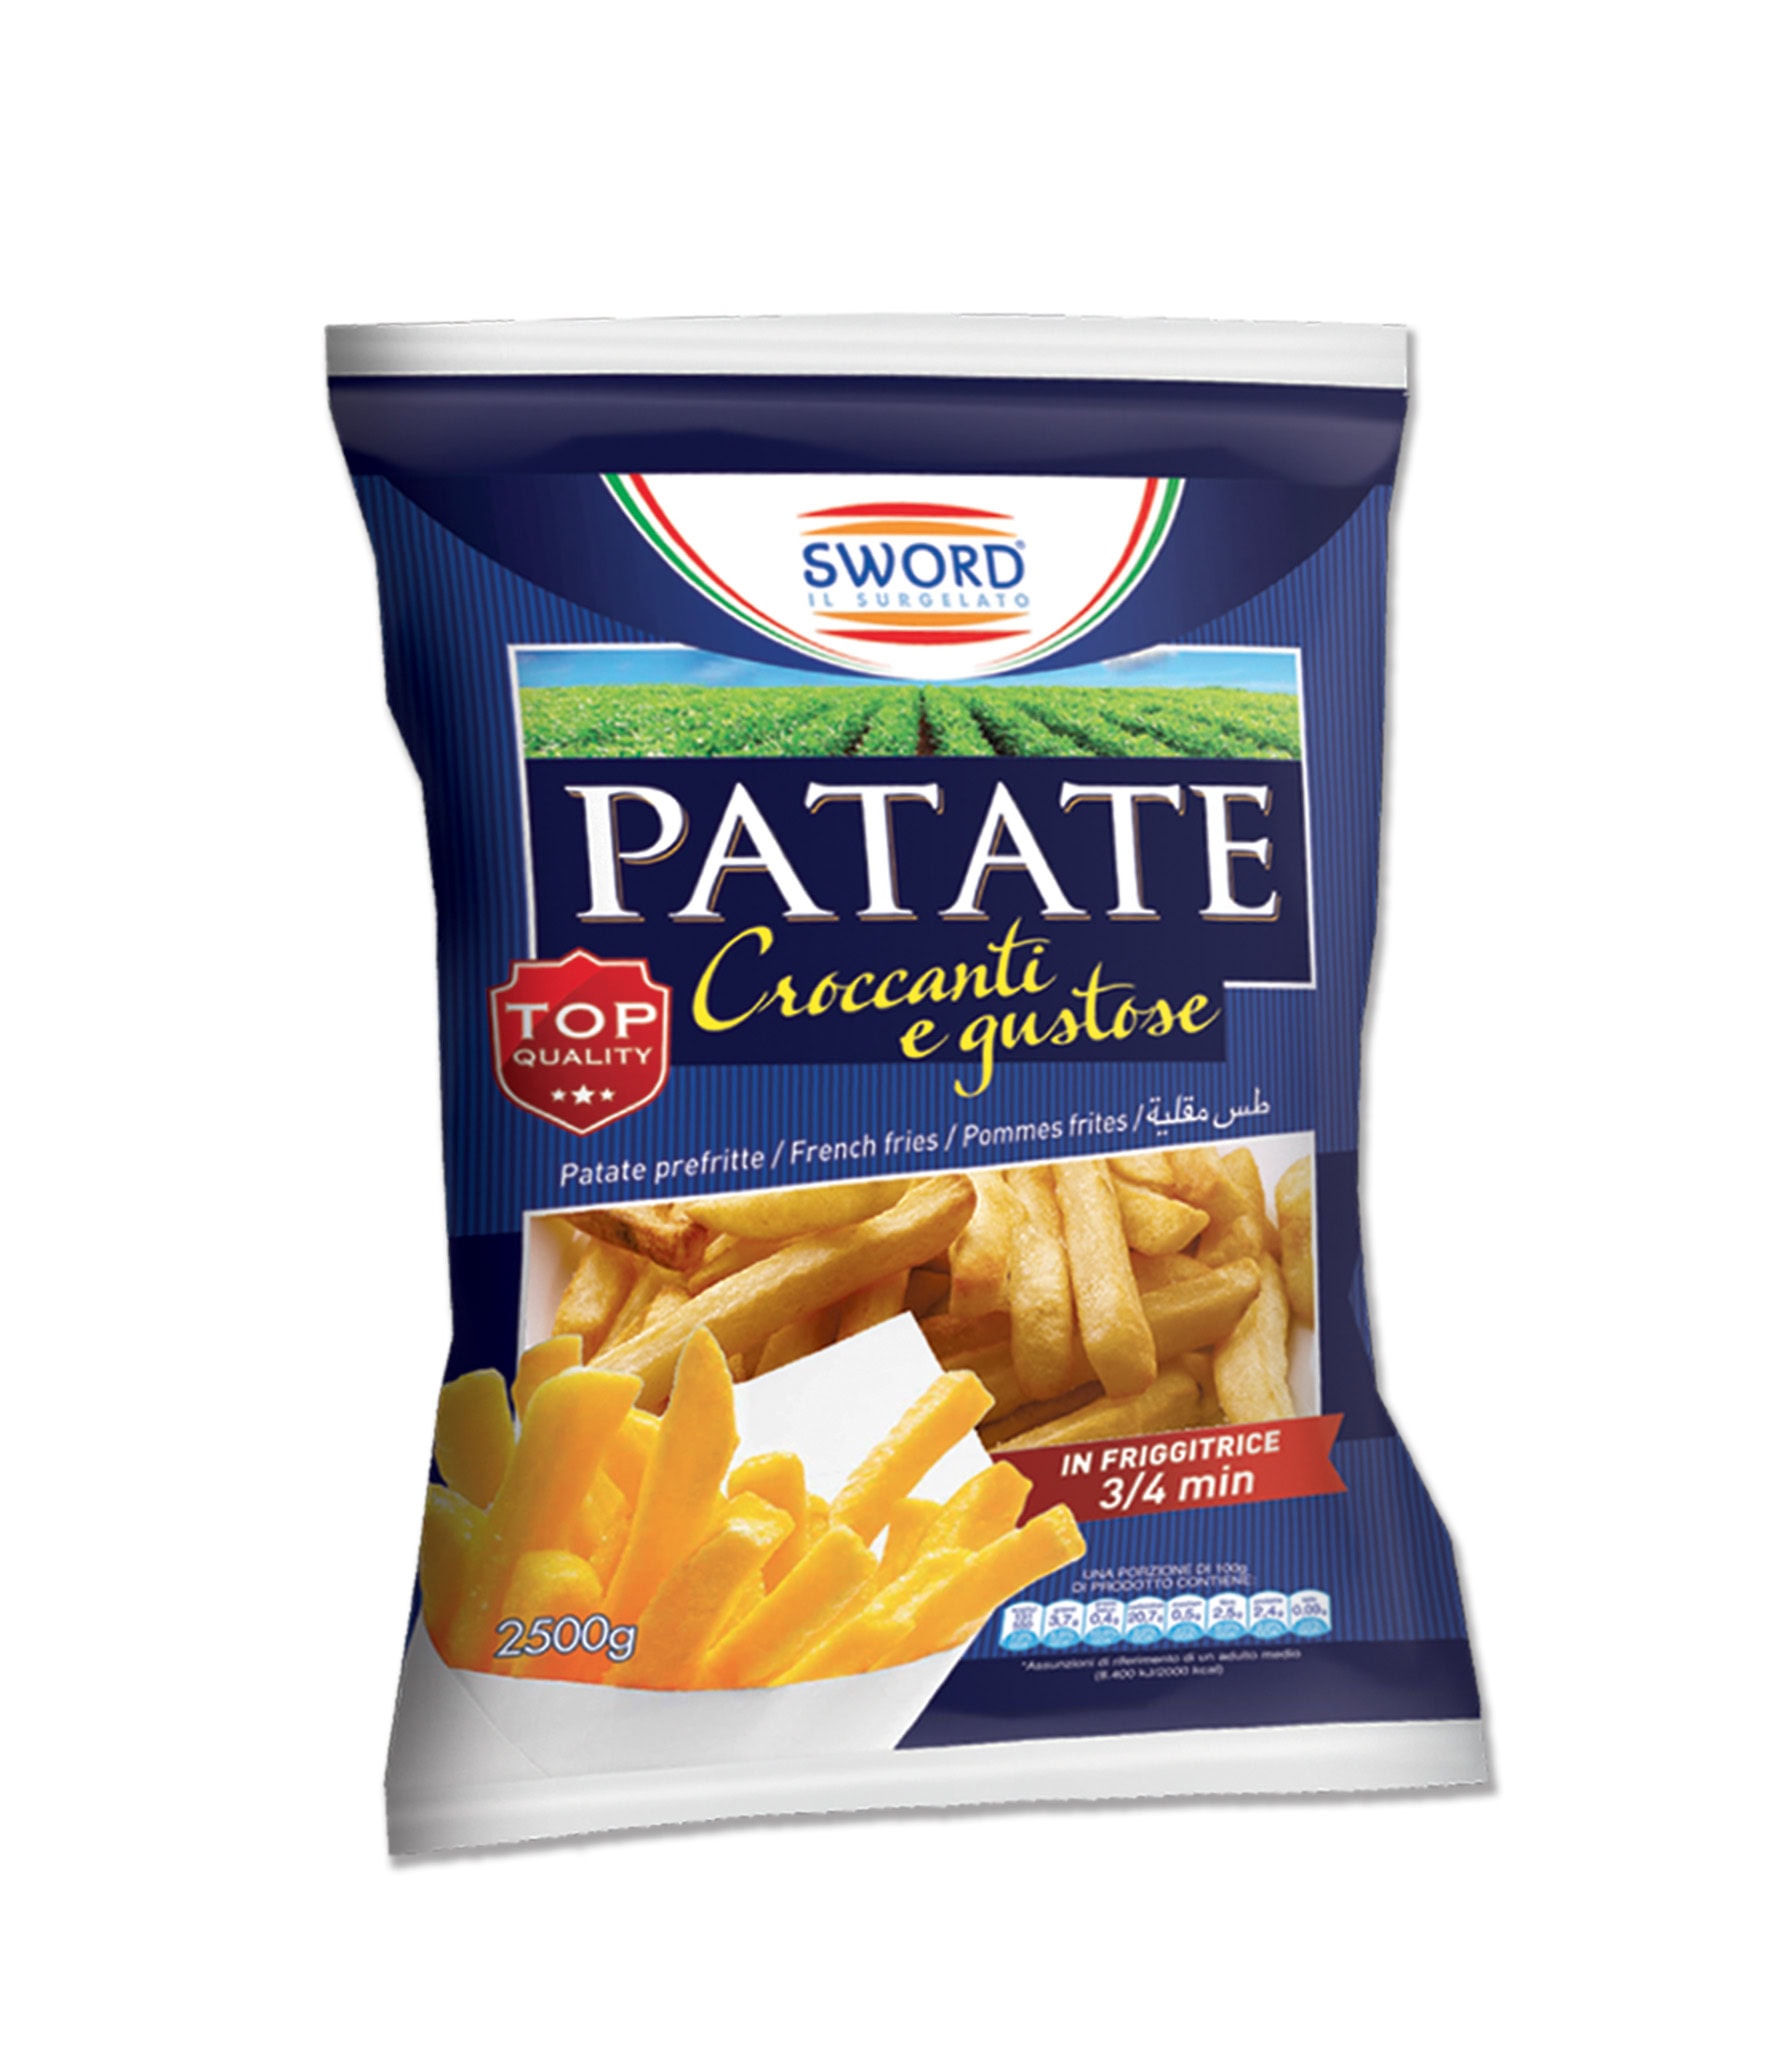 Patate Top Quality